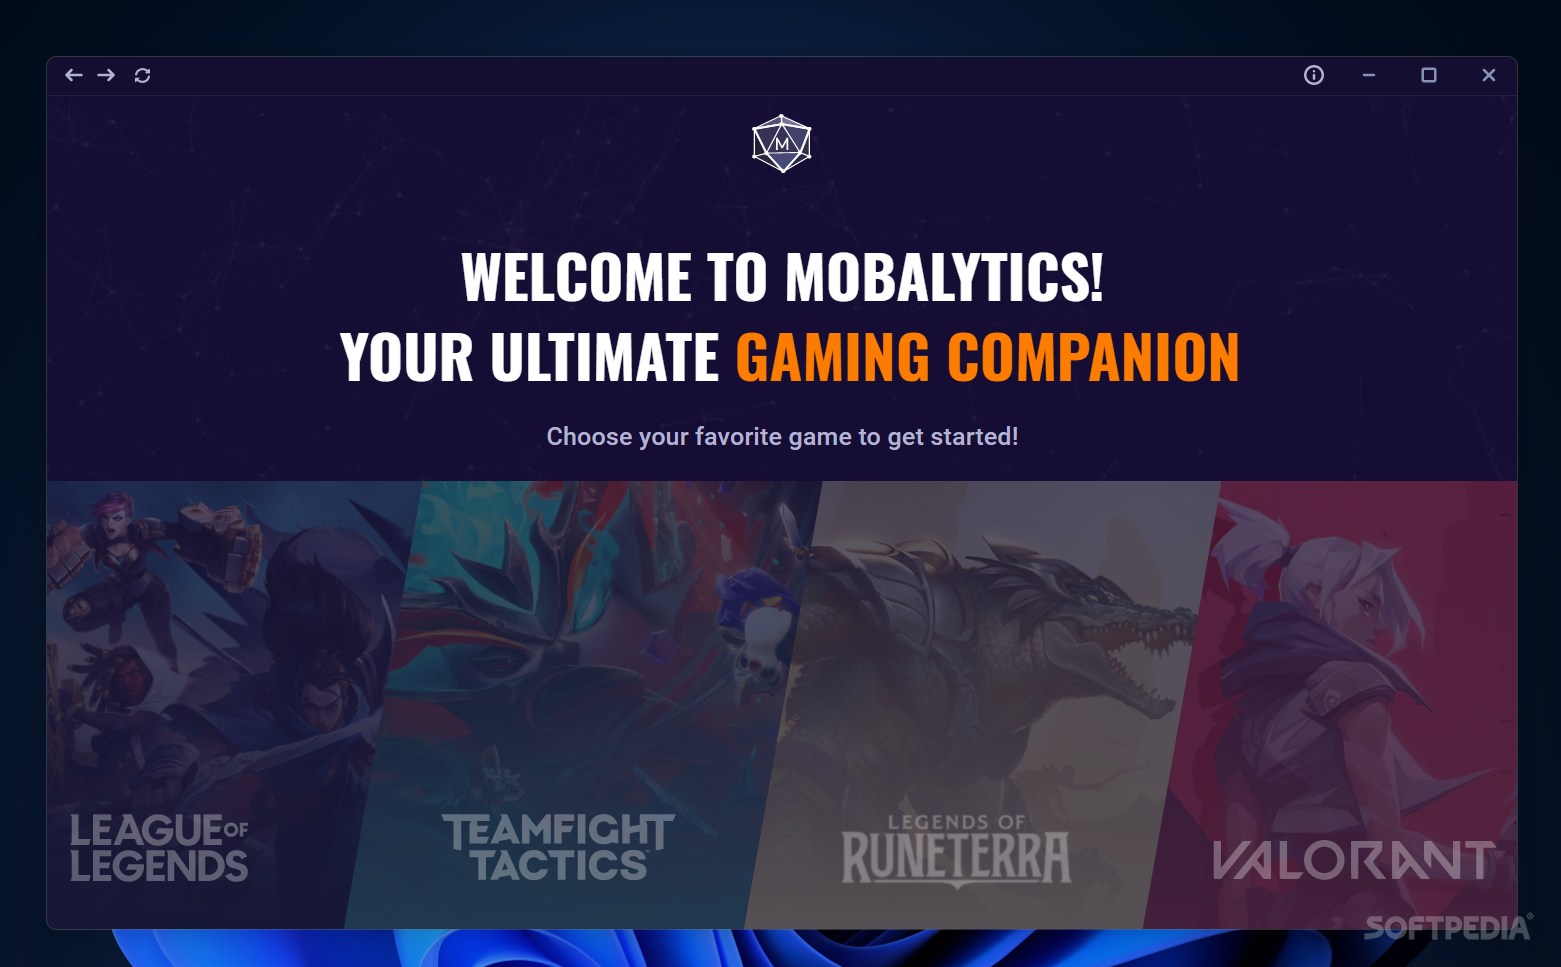 Mobalytics - The All-in-One Companion for Every Gamer